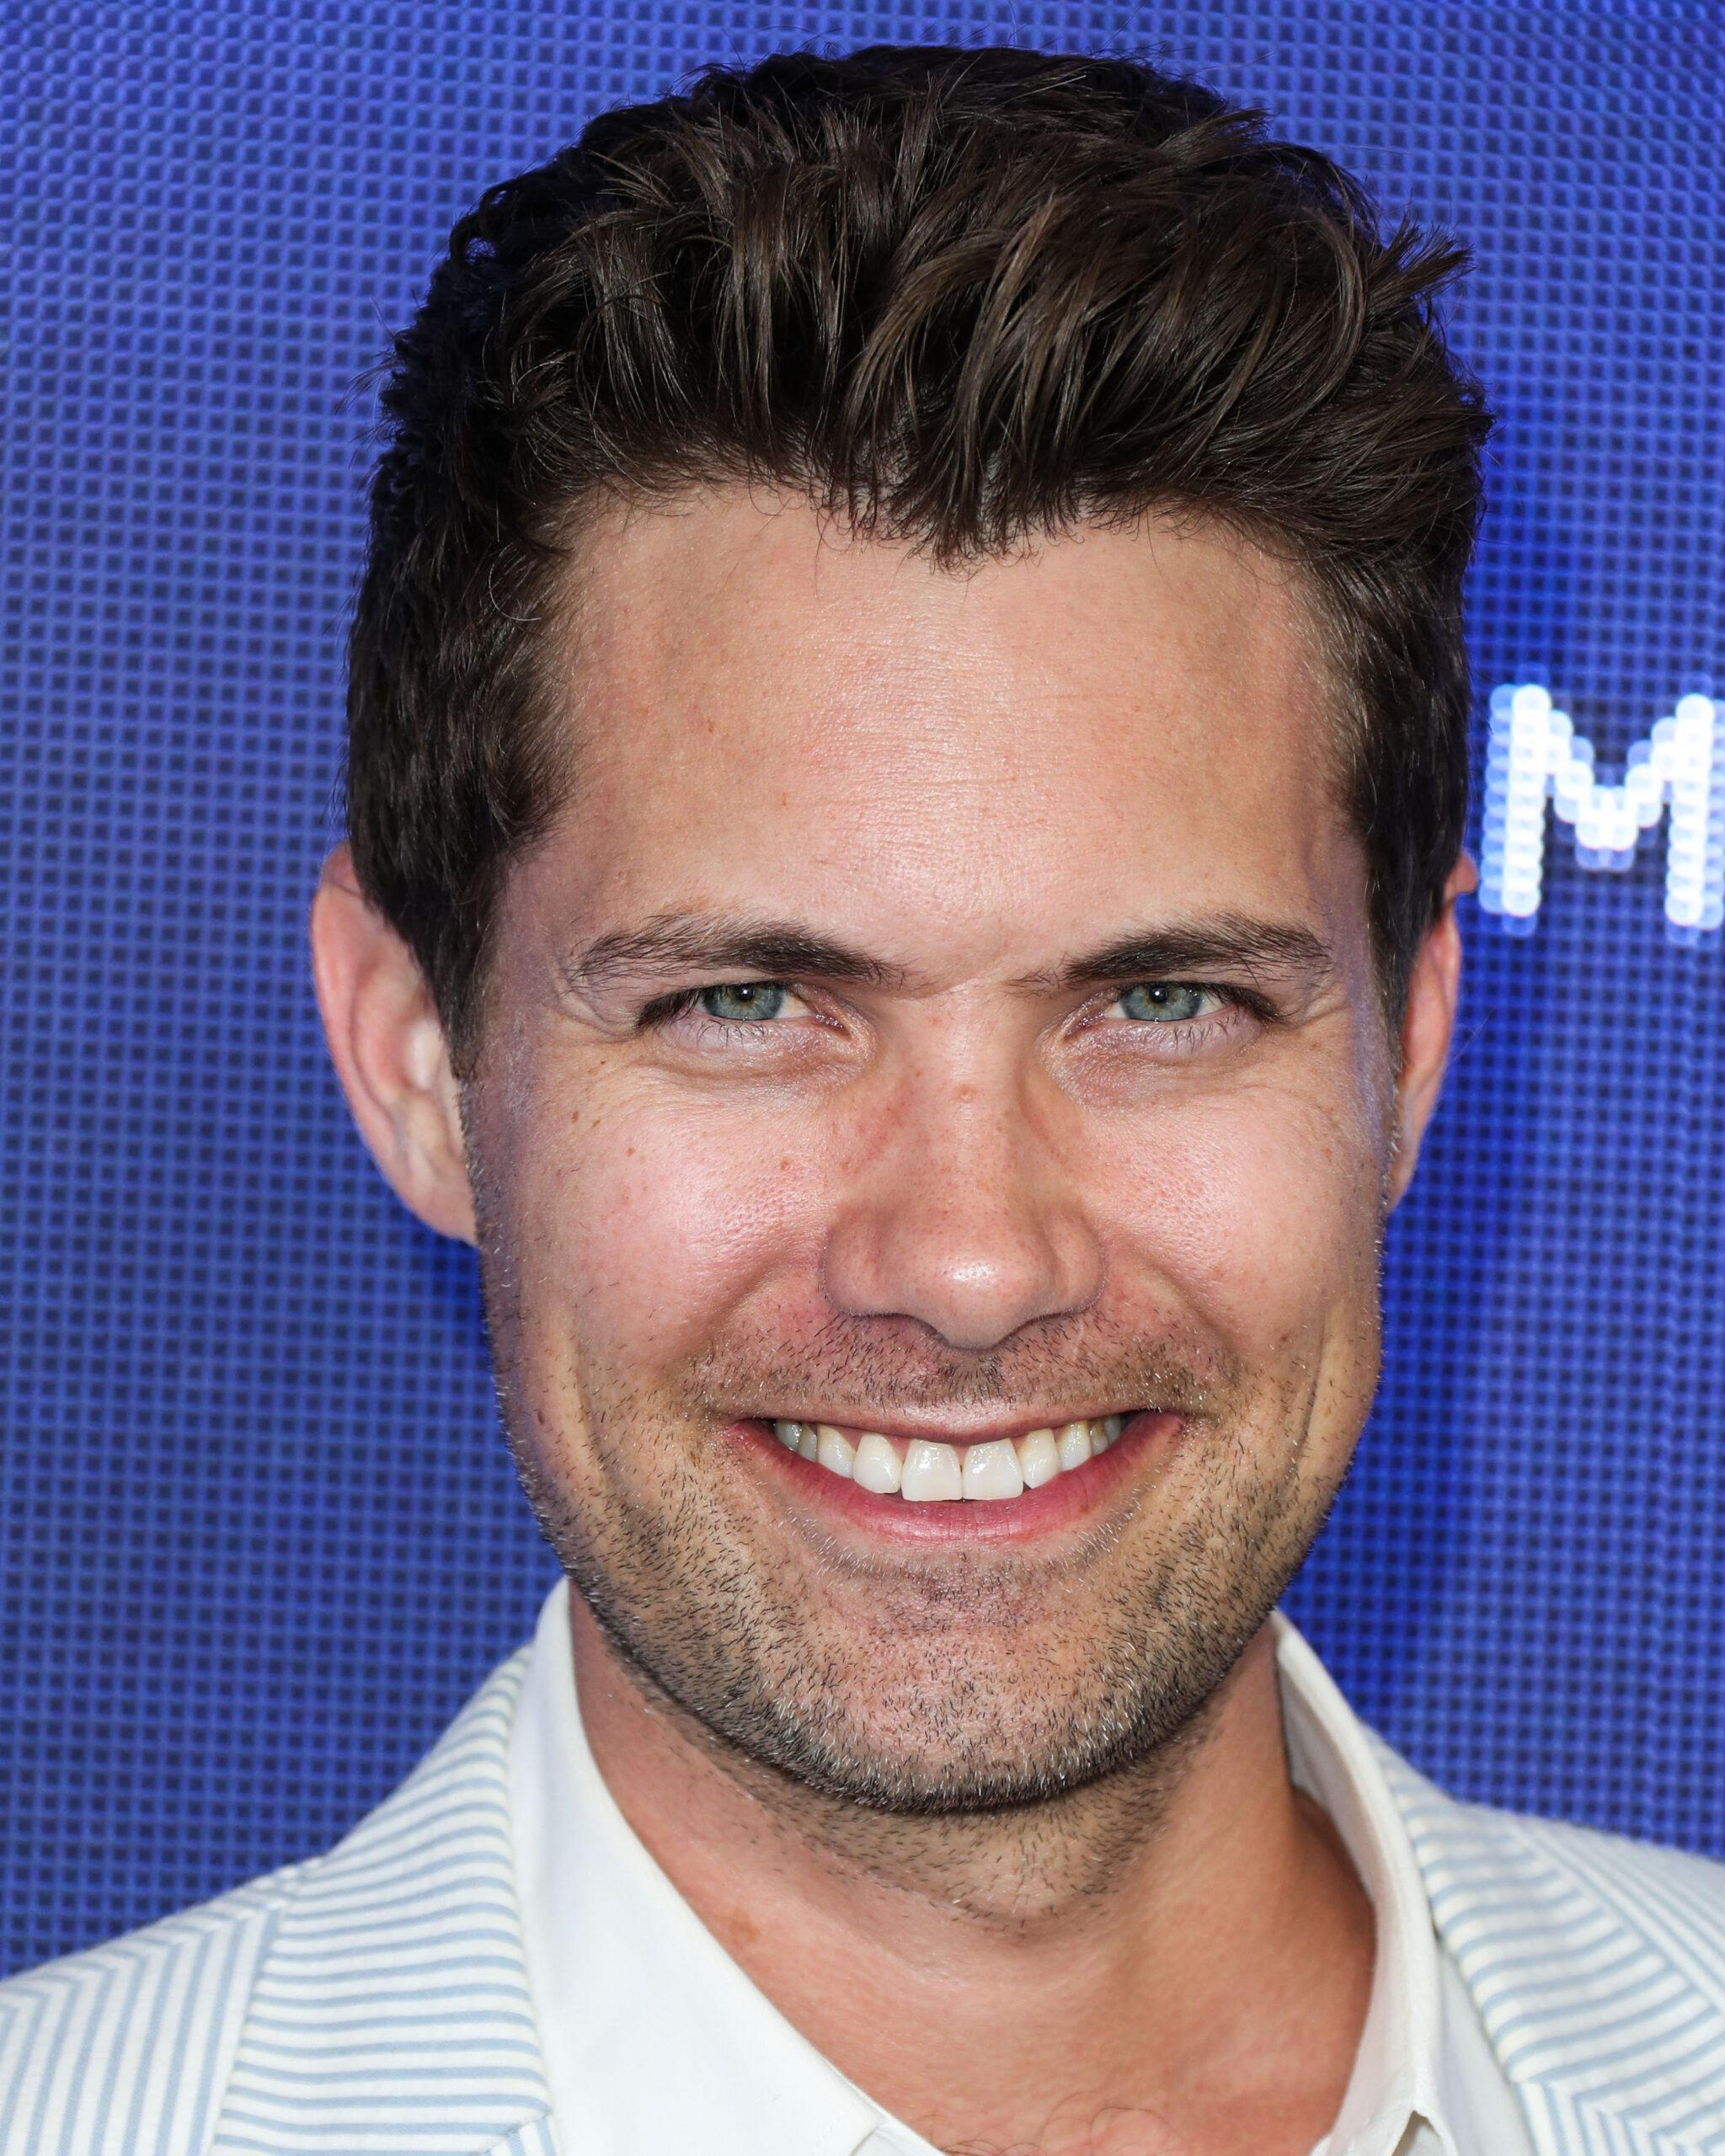 Drew Seeley Dishes On His Experience Working With Zac Efron And The 'High School Musical' Cast